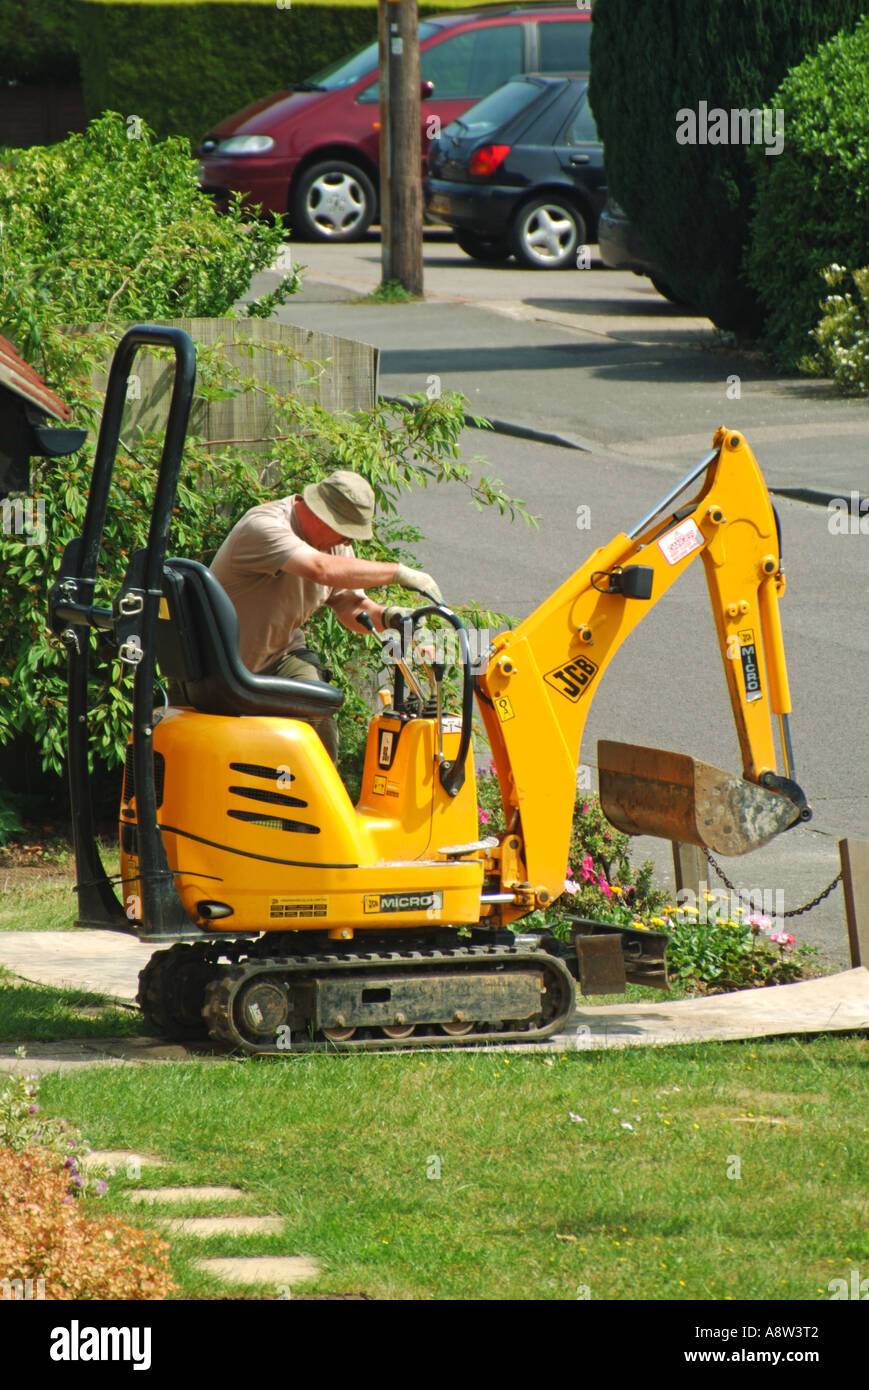 Man controlling Mini excavator crawling across domestic front garden lawn over plywood sheets laid down for protection Essex England UK Stock Photo